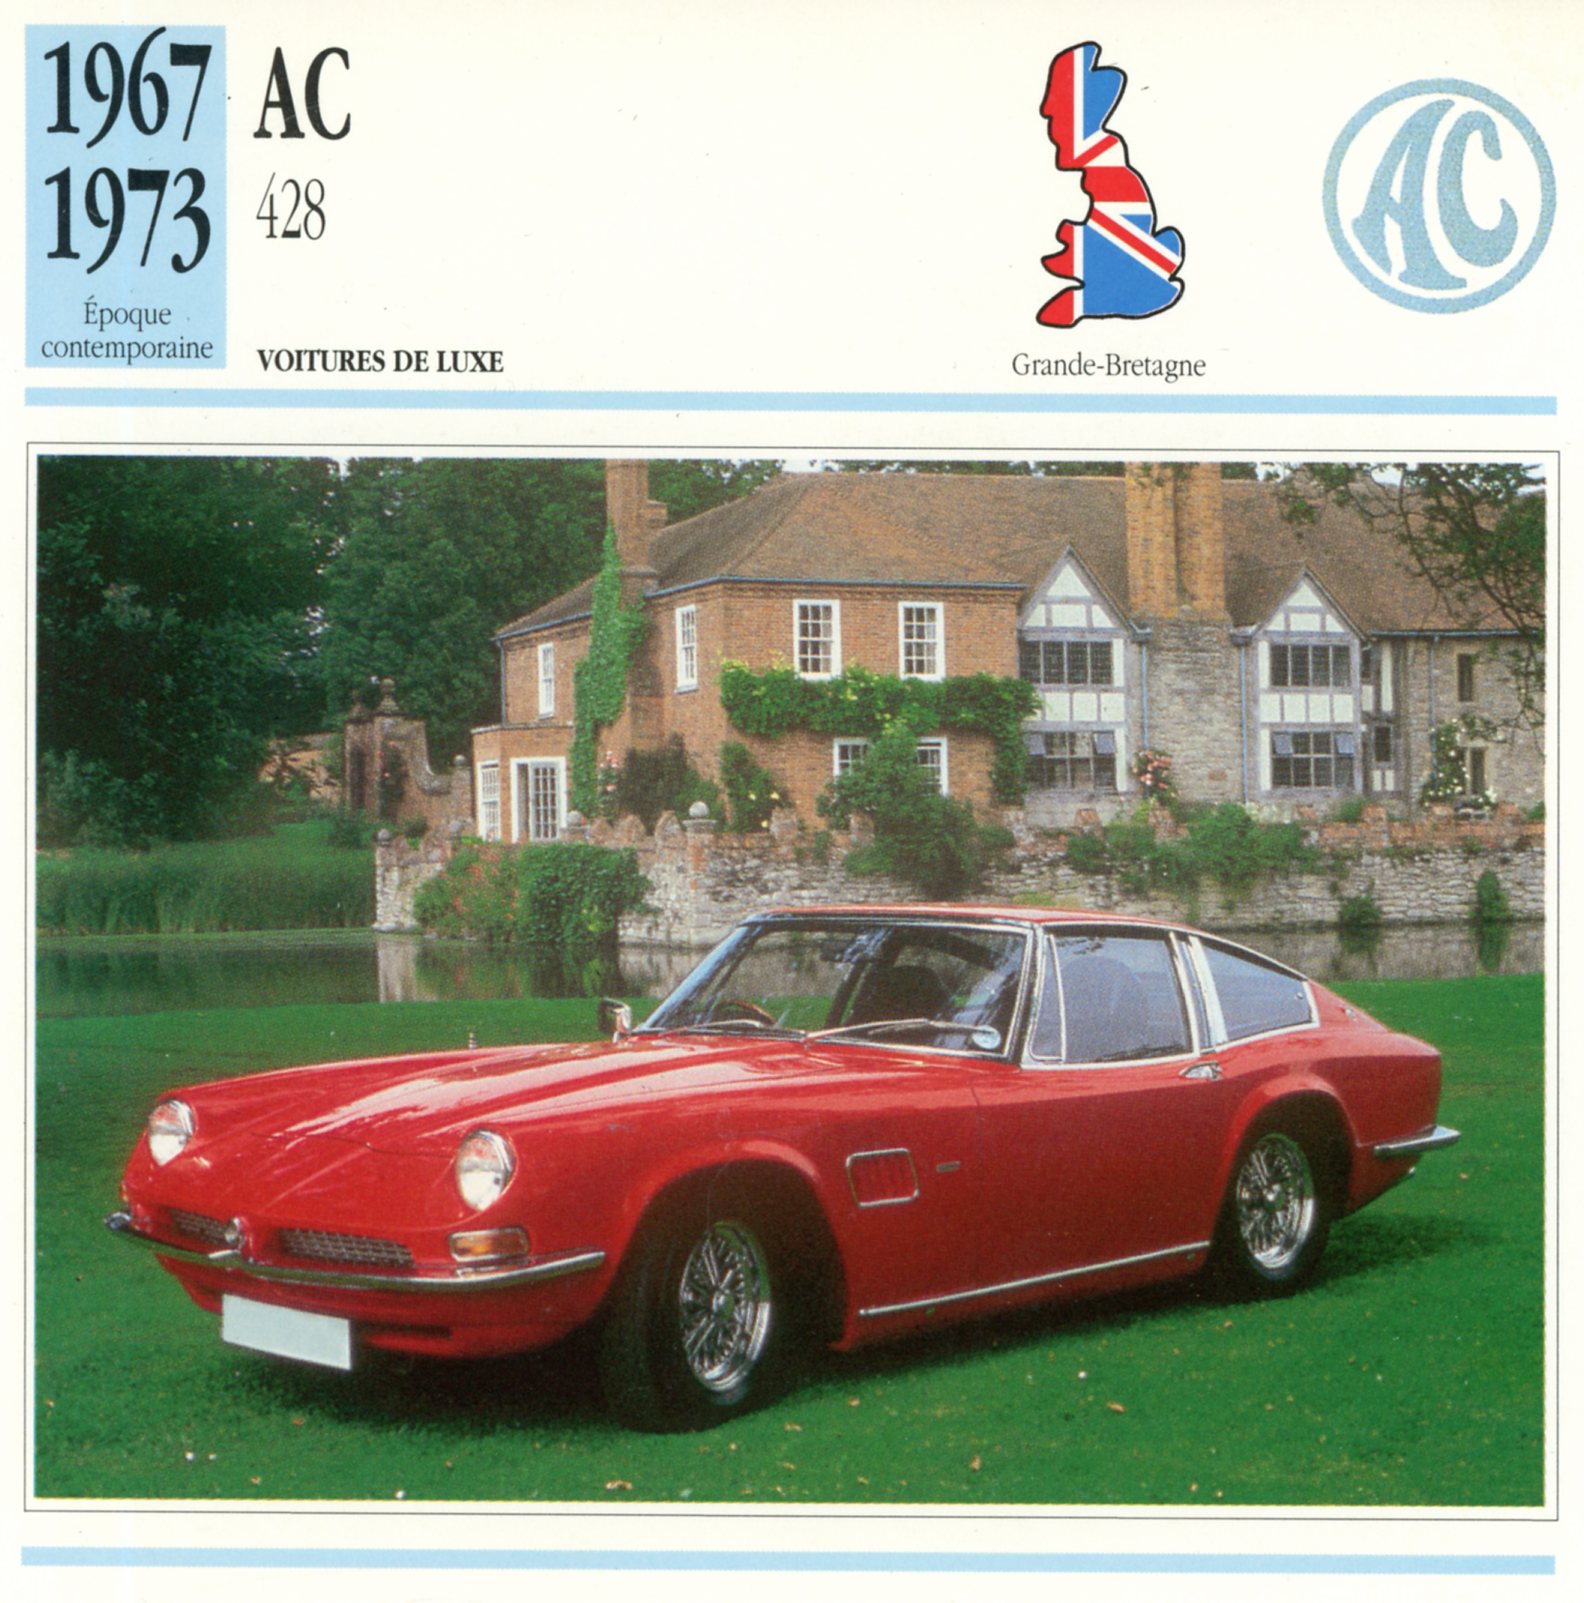 FICHE-AUTO-AC-428-1973-LEMASTERBROCKERS-CARS-CARD